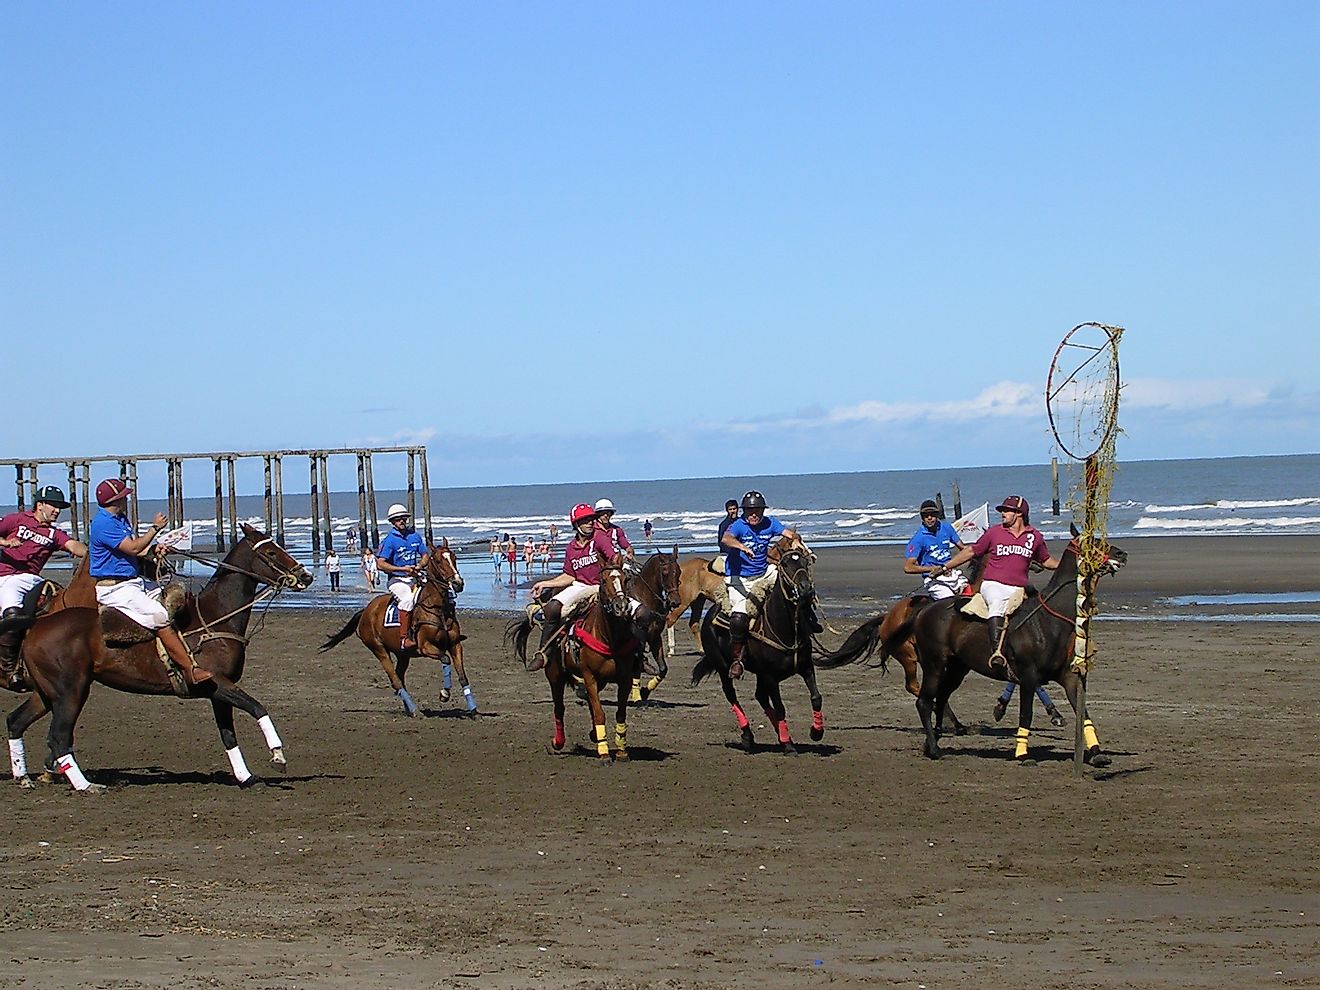 Played On Horseback, Pato Is The National Game Of Argentina